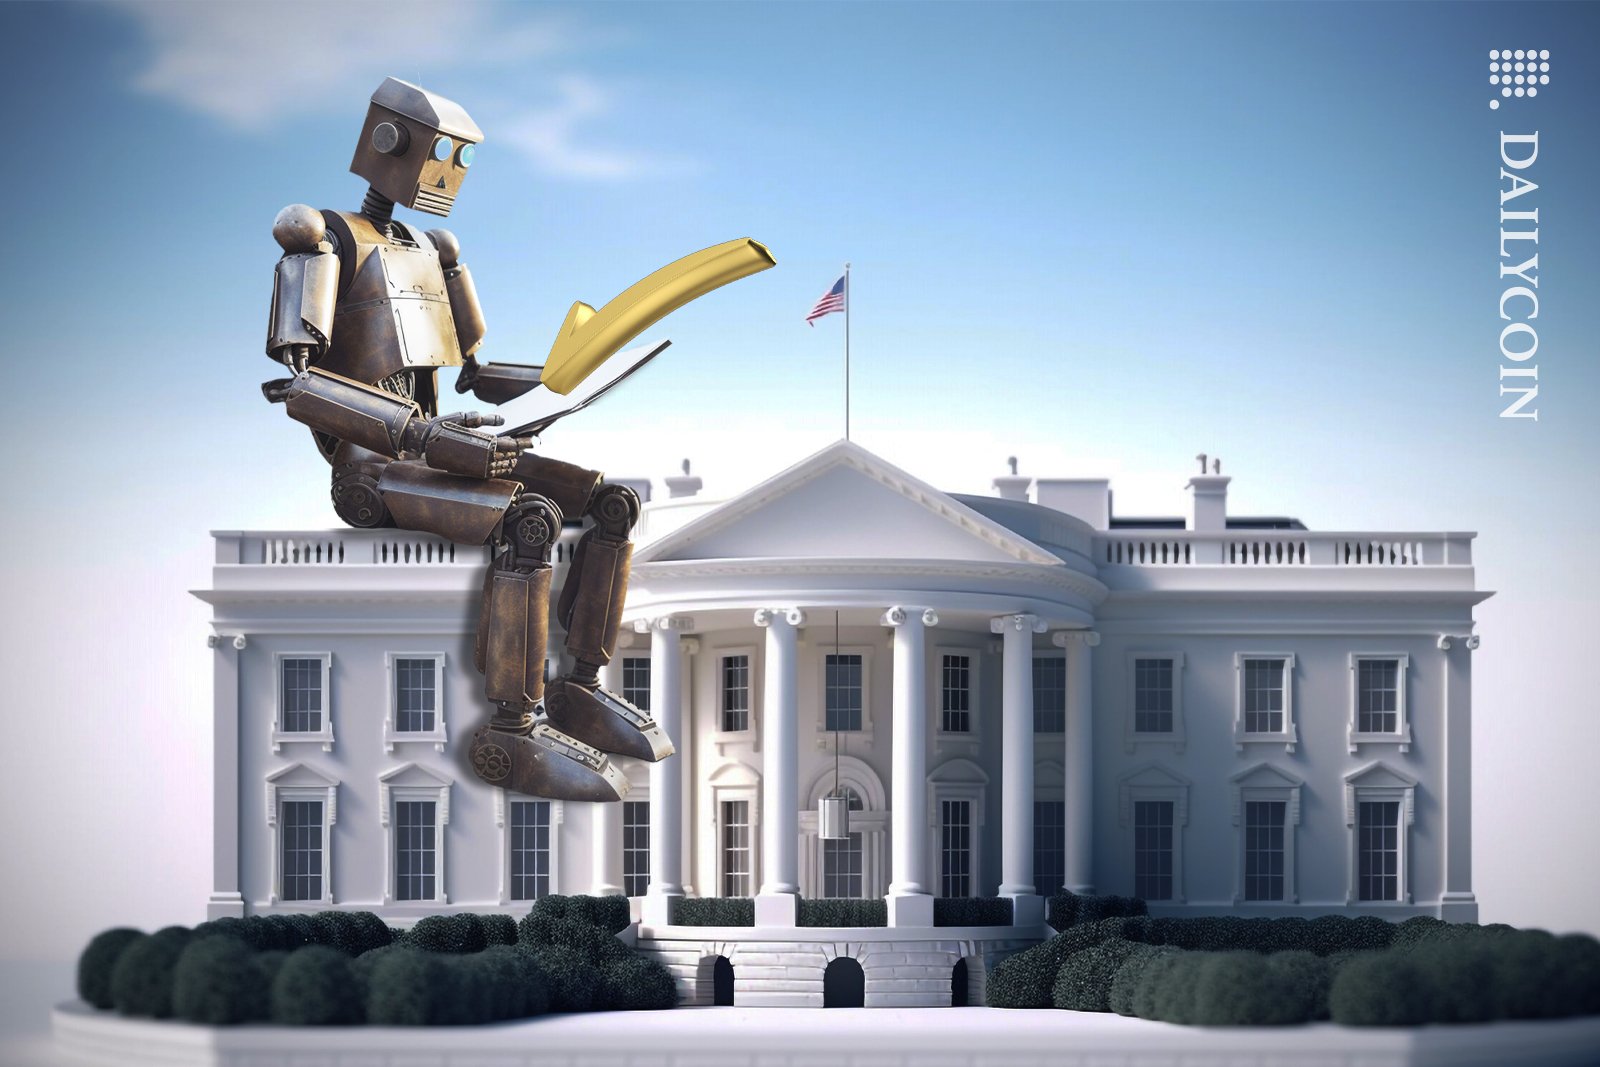 Robot sitting on the White House with a crypto document approved.